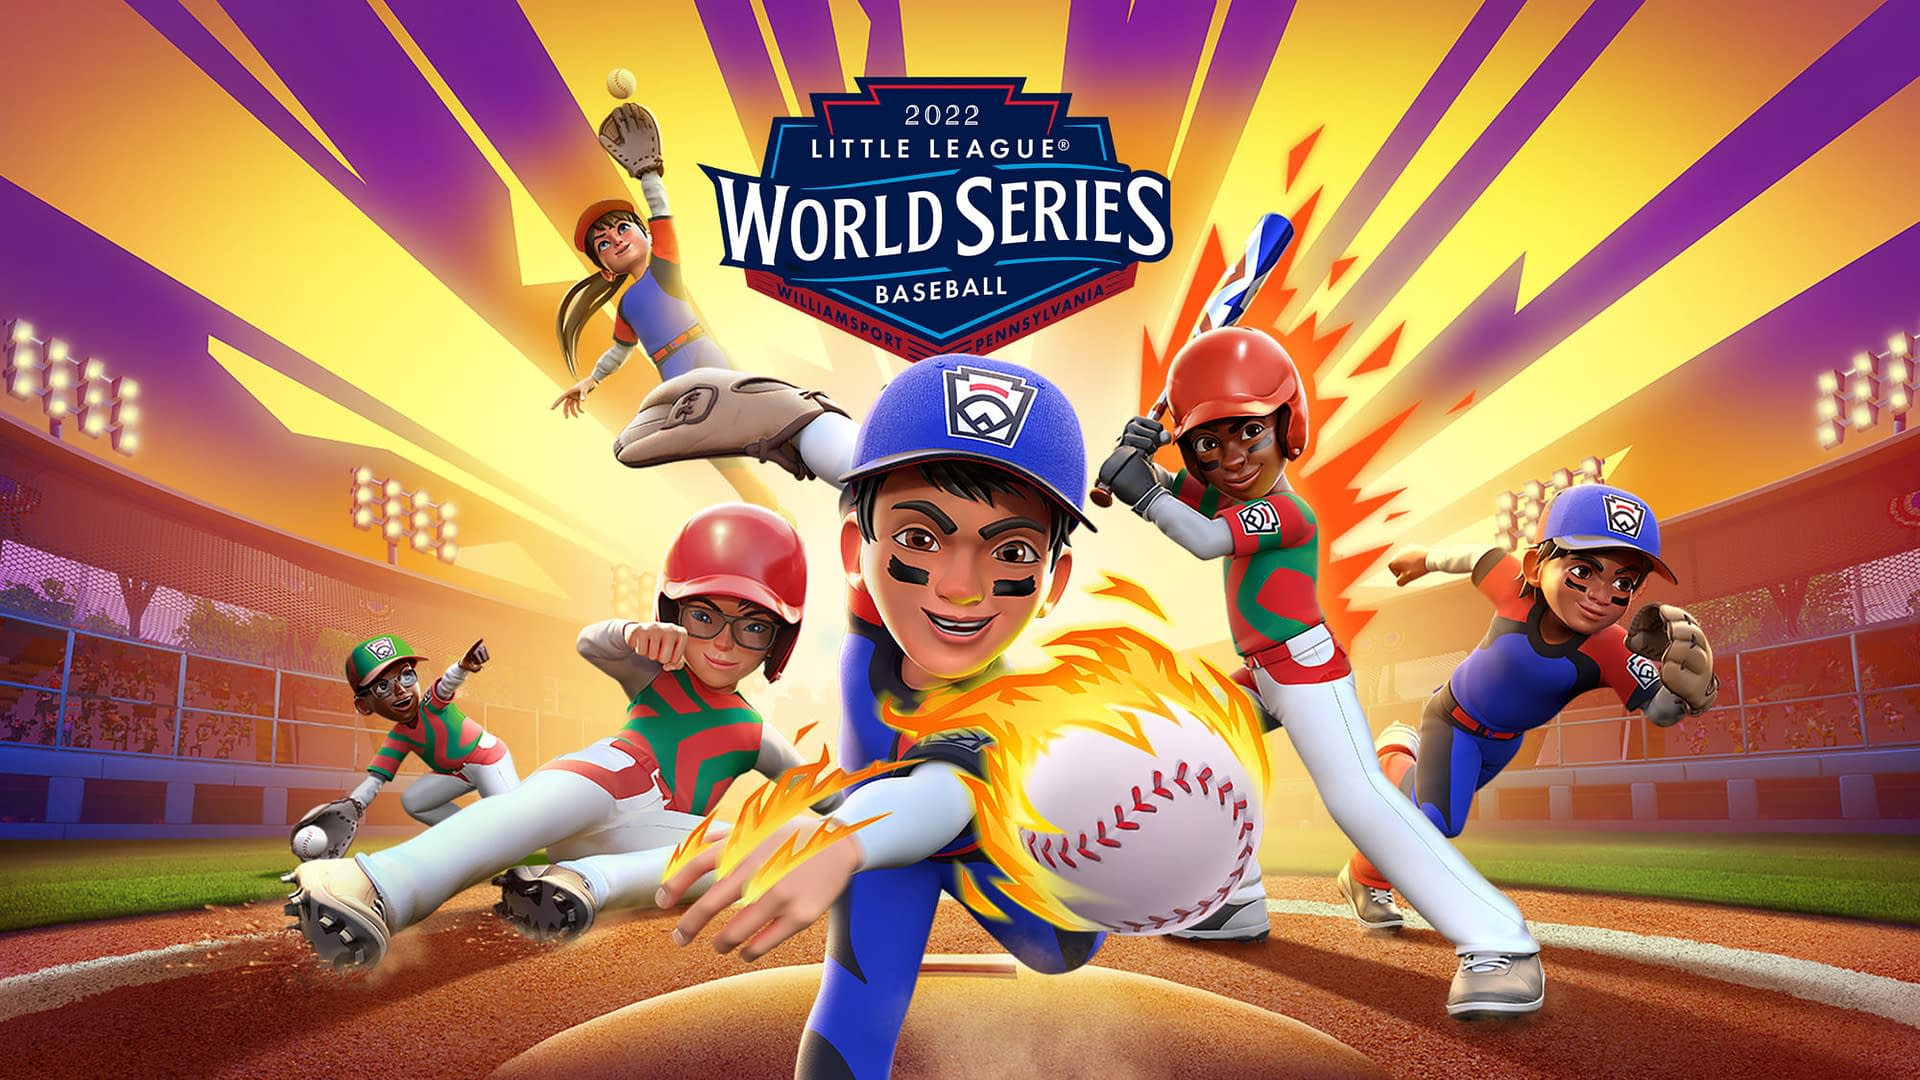 Today, the iconic Little League Baseball World Series begins in